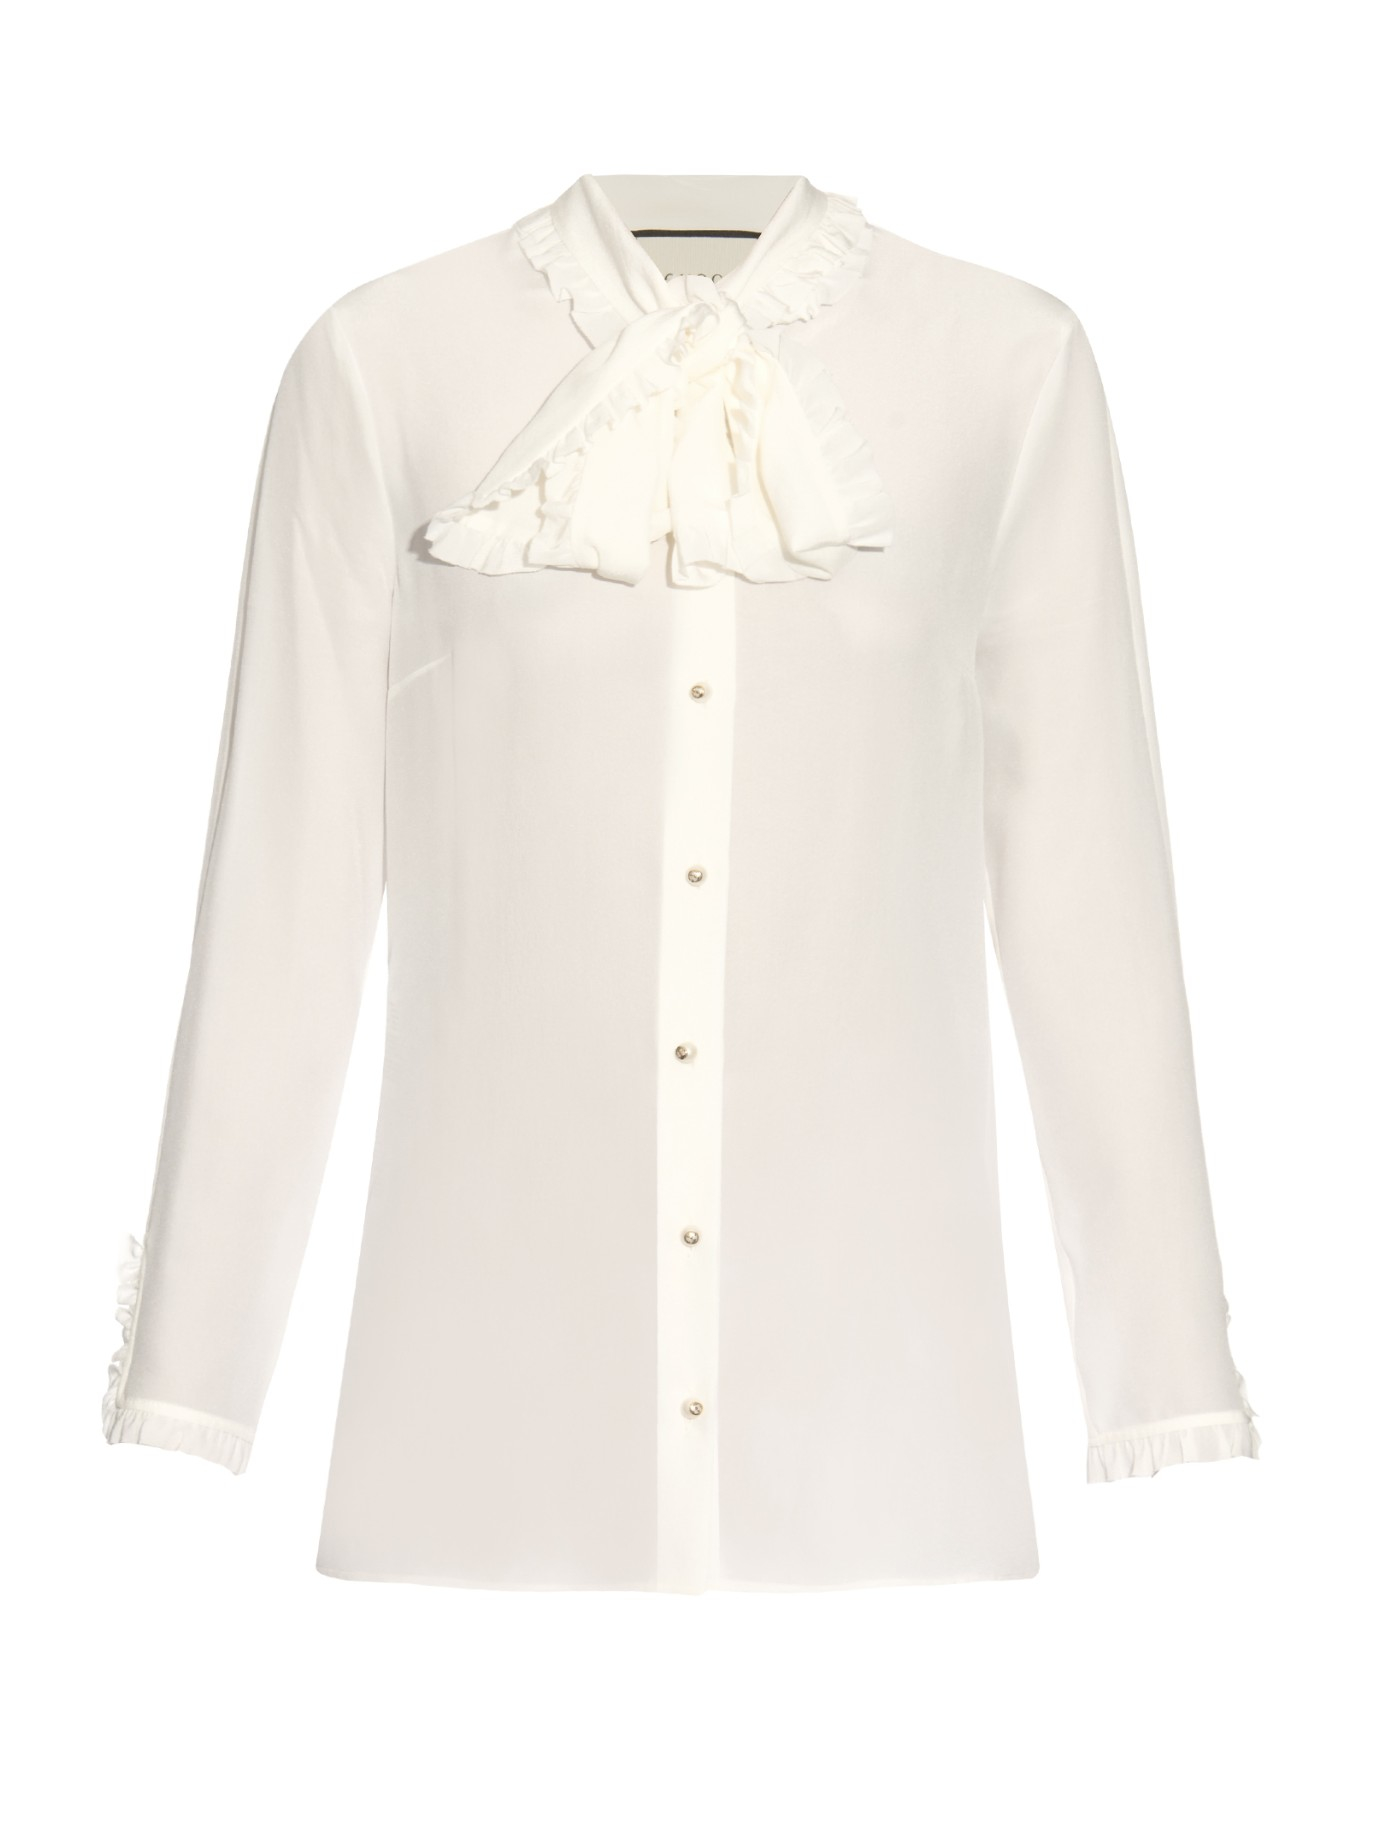 Gucci High-neck Ruffled Silk-crepe Blouse in White | Lyst